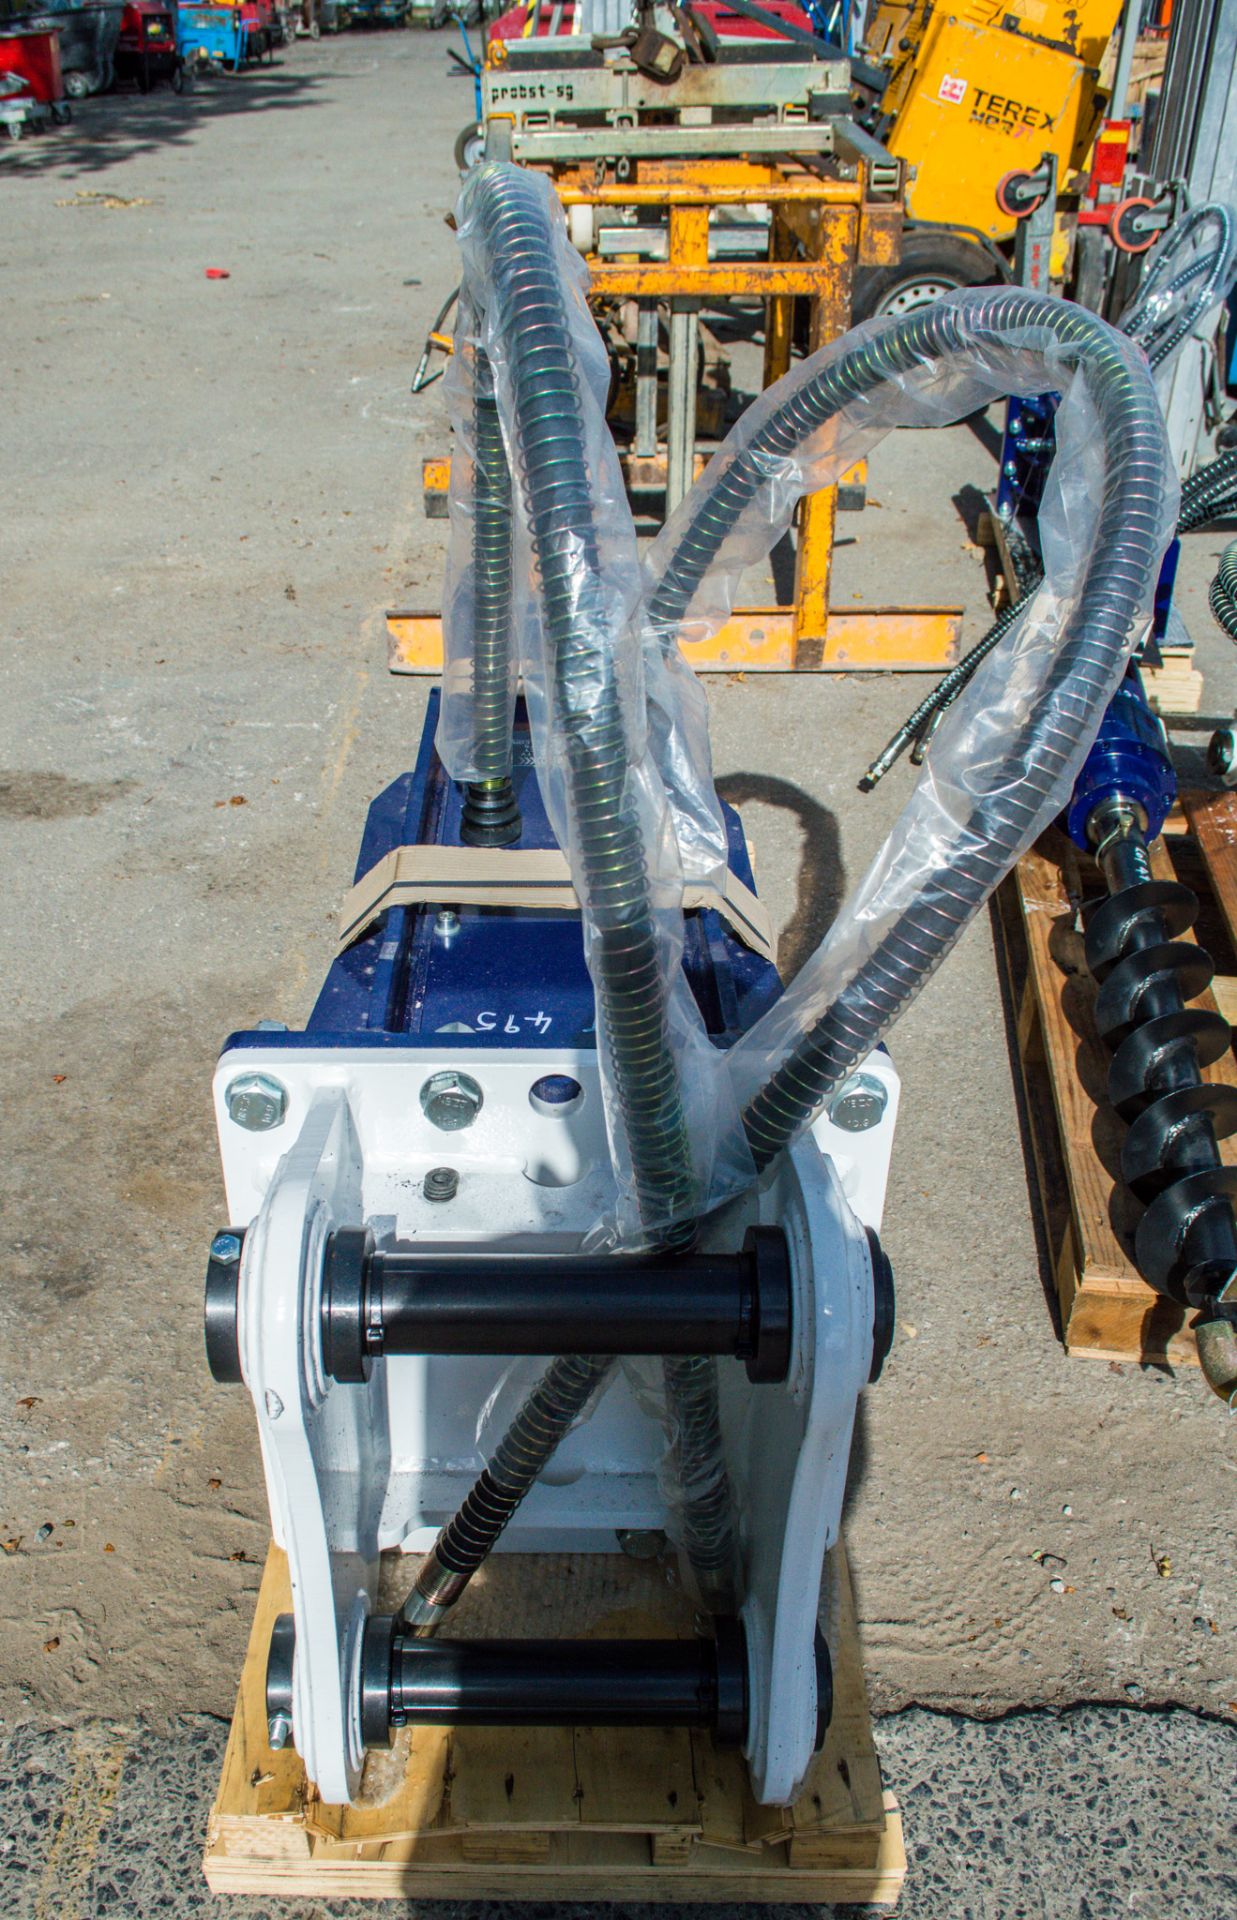 Hirox HD-X30 hydraulic breaker to suit 13 tonne excavator ** New and unused ** - Image 3 of 3